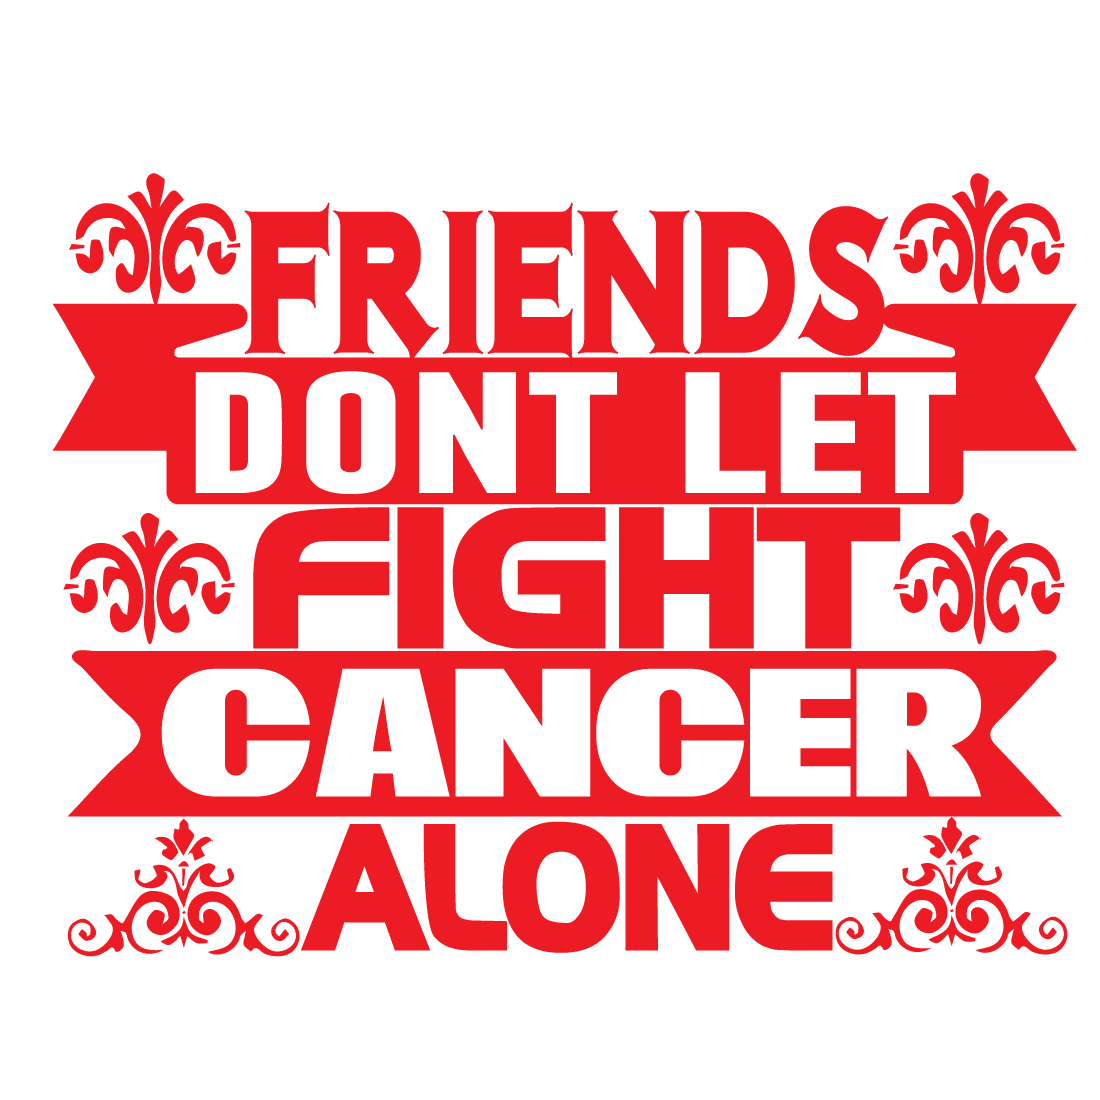 Friends-Don’t-Let-Friends-Fight-Cancer-Alone preview image.